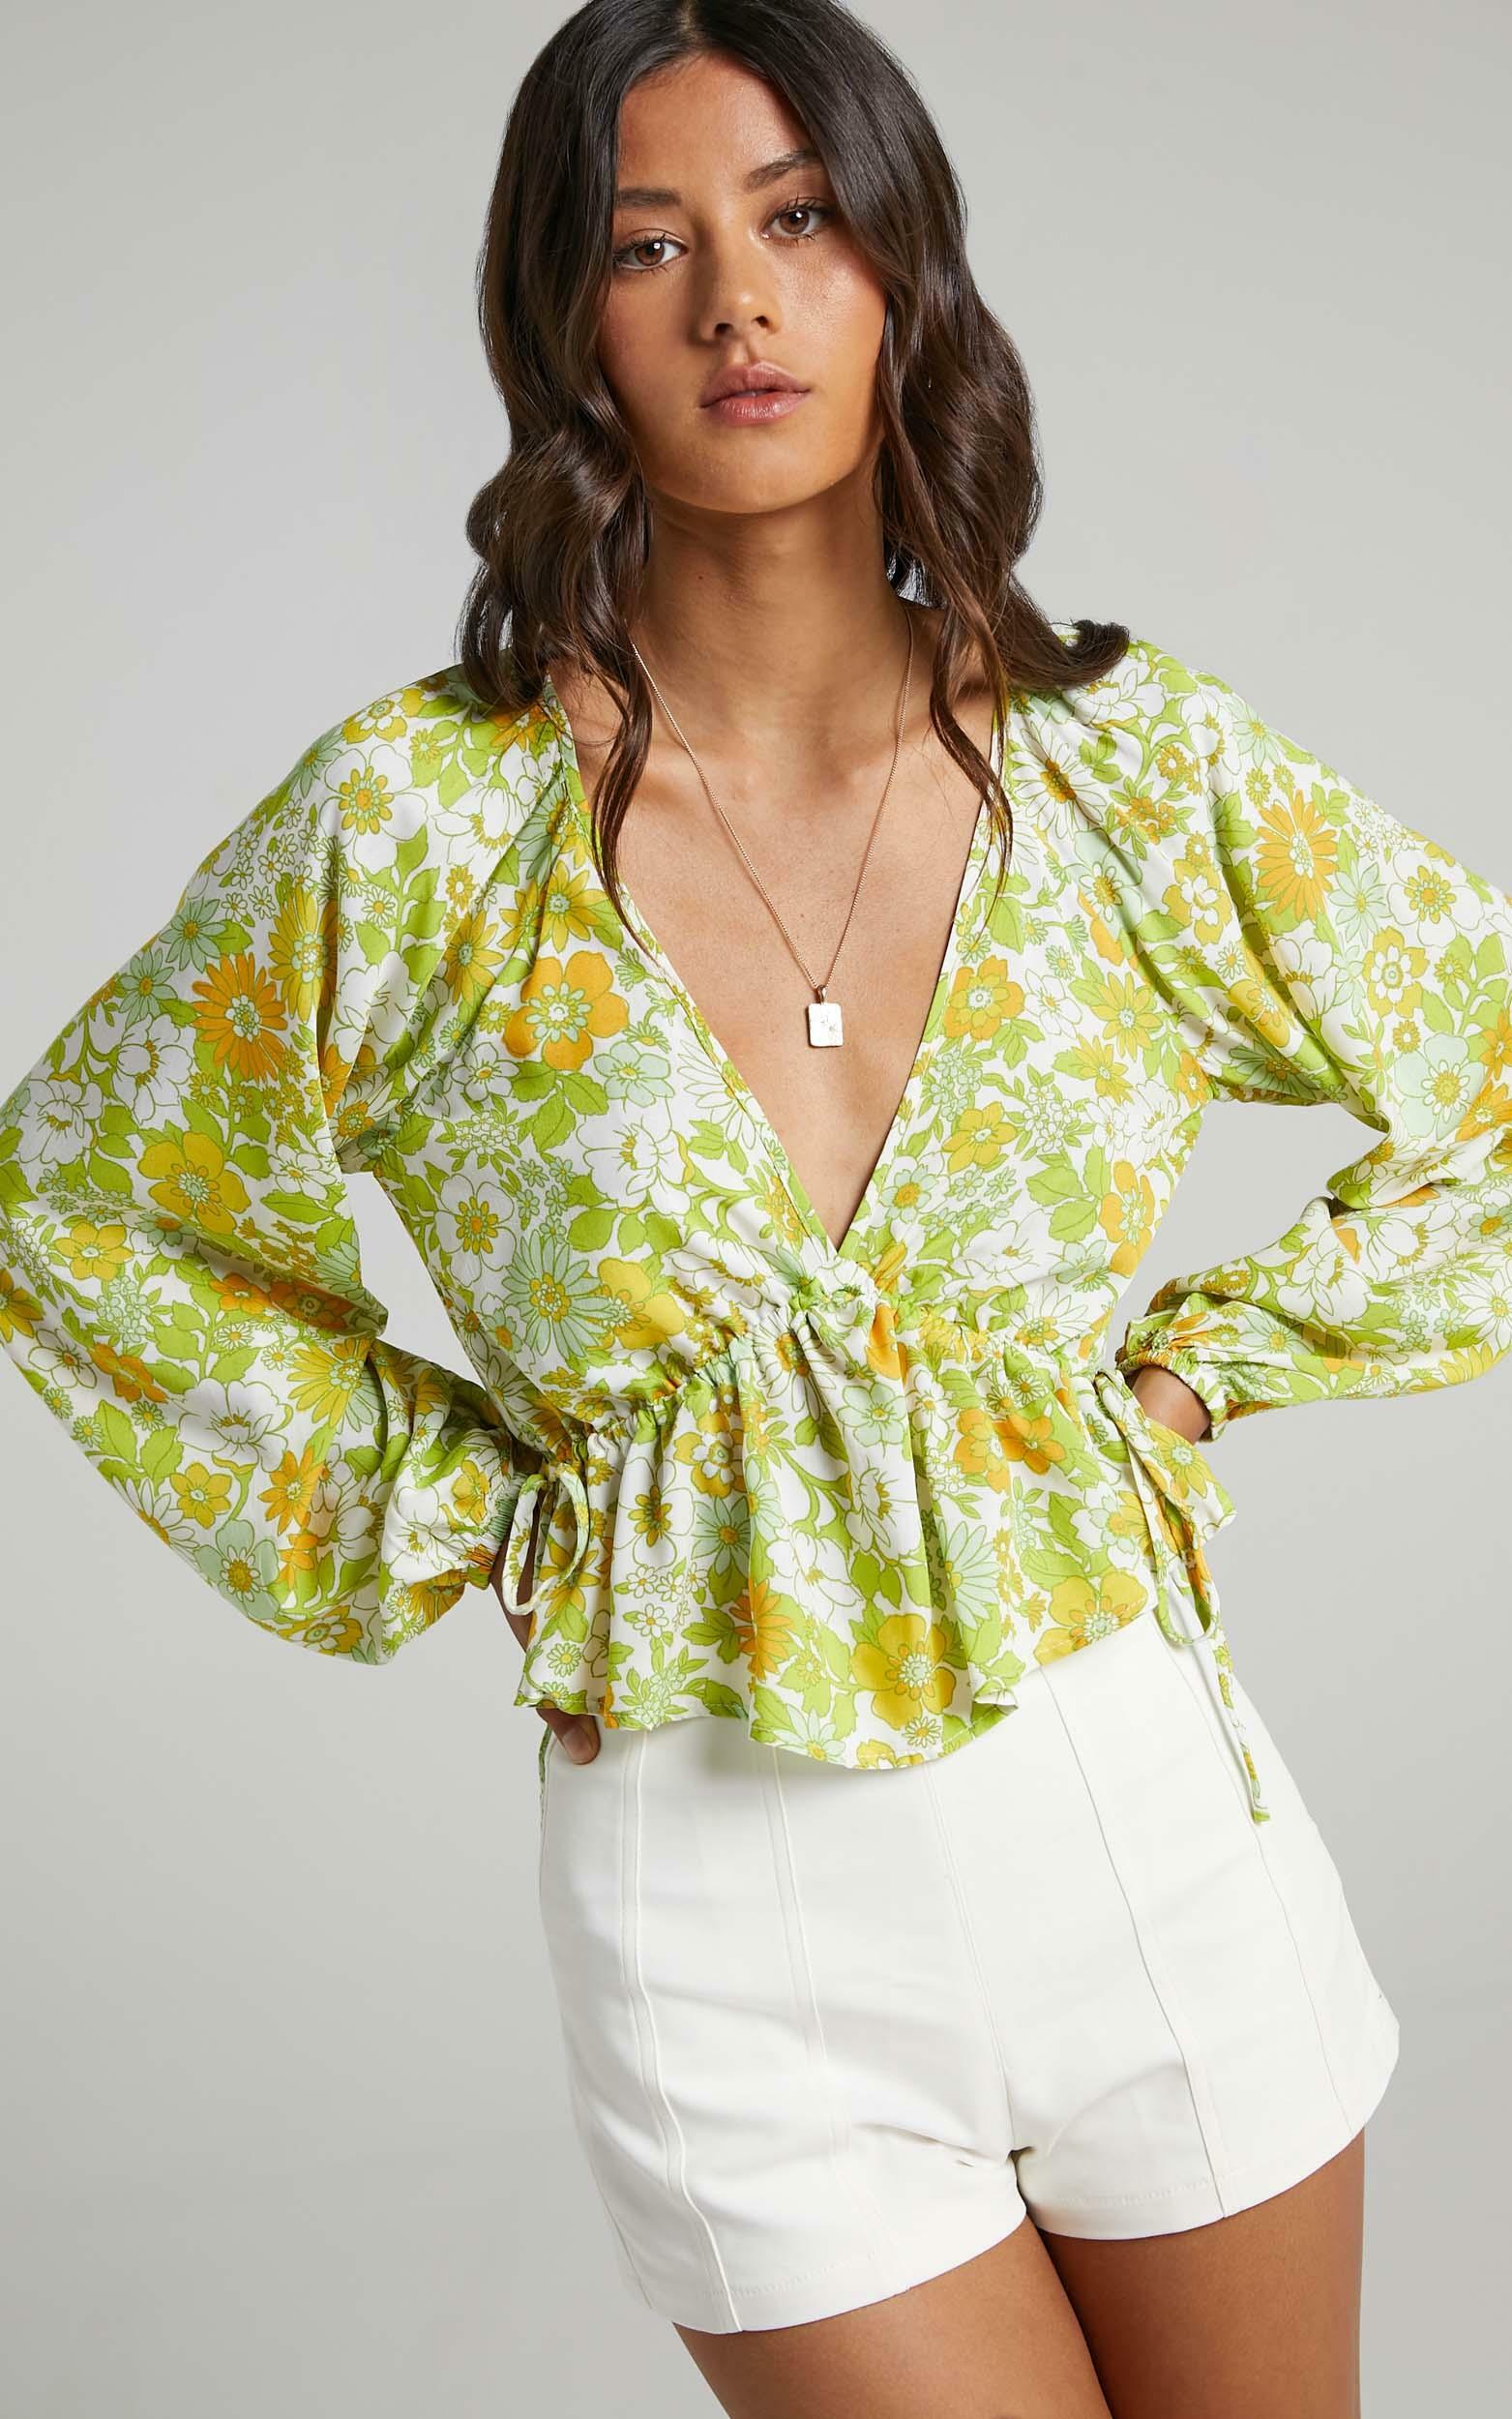 Isidore Top in Harmony Floral Rayon | Showpo USA